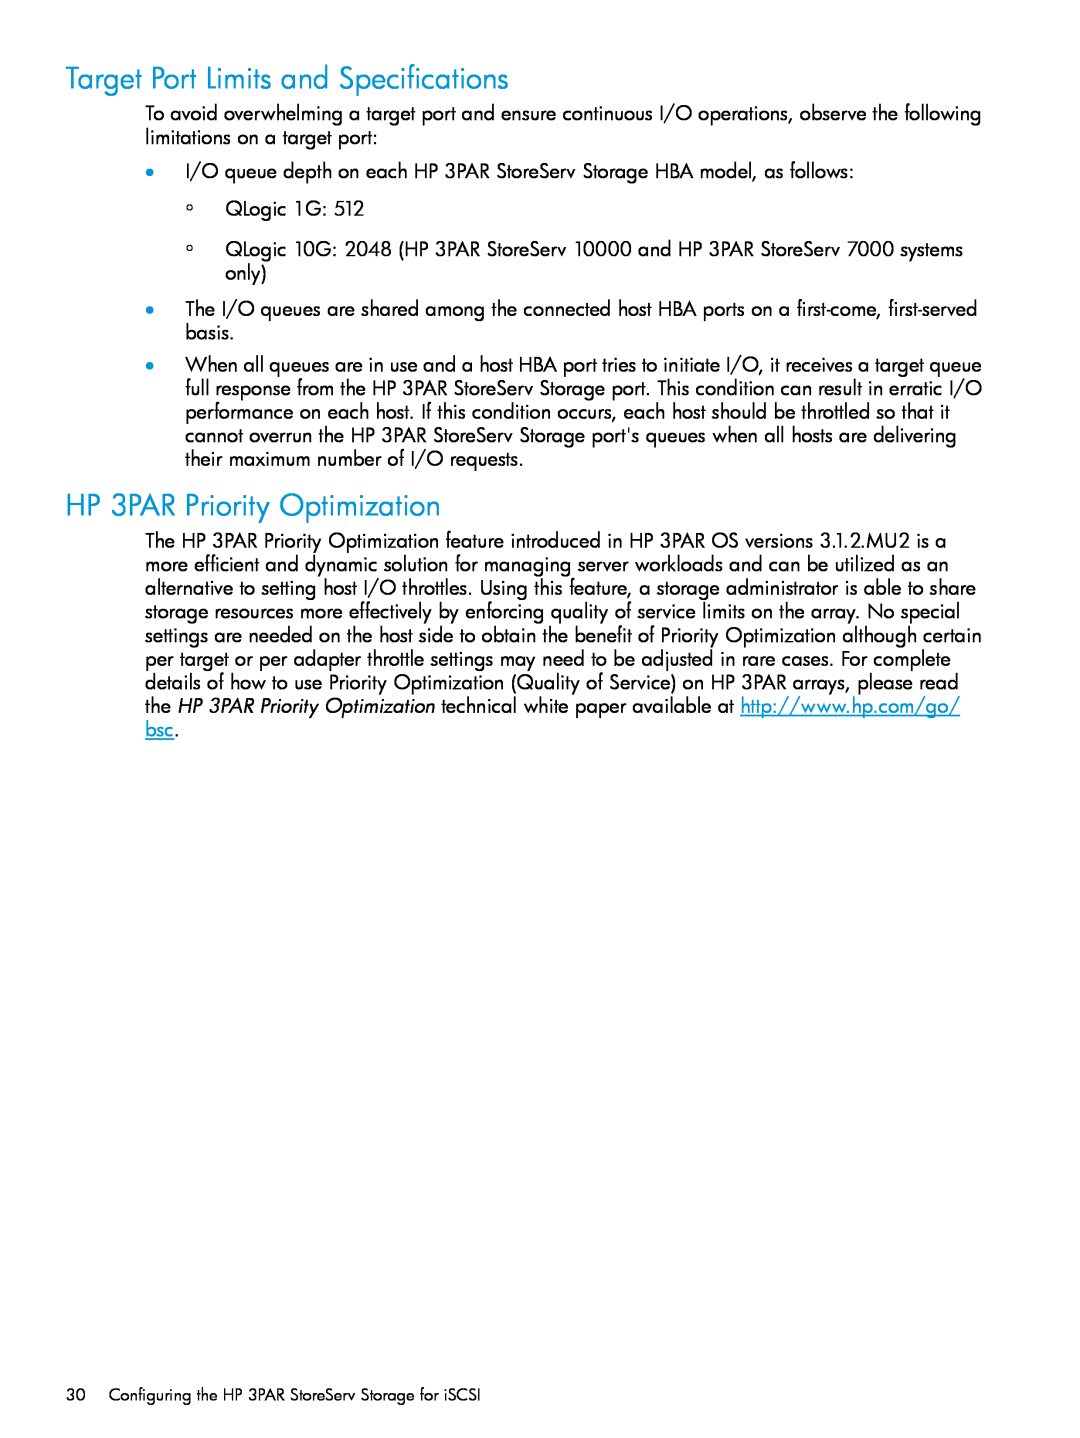 HP QR516B manual Target Port Limits and Specifications, HP 3PAR Priority Optimization 